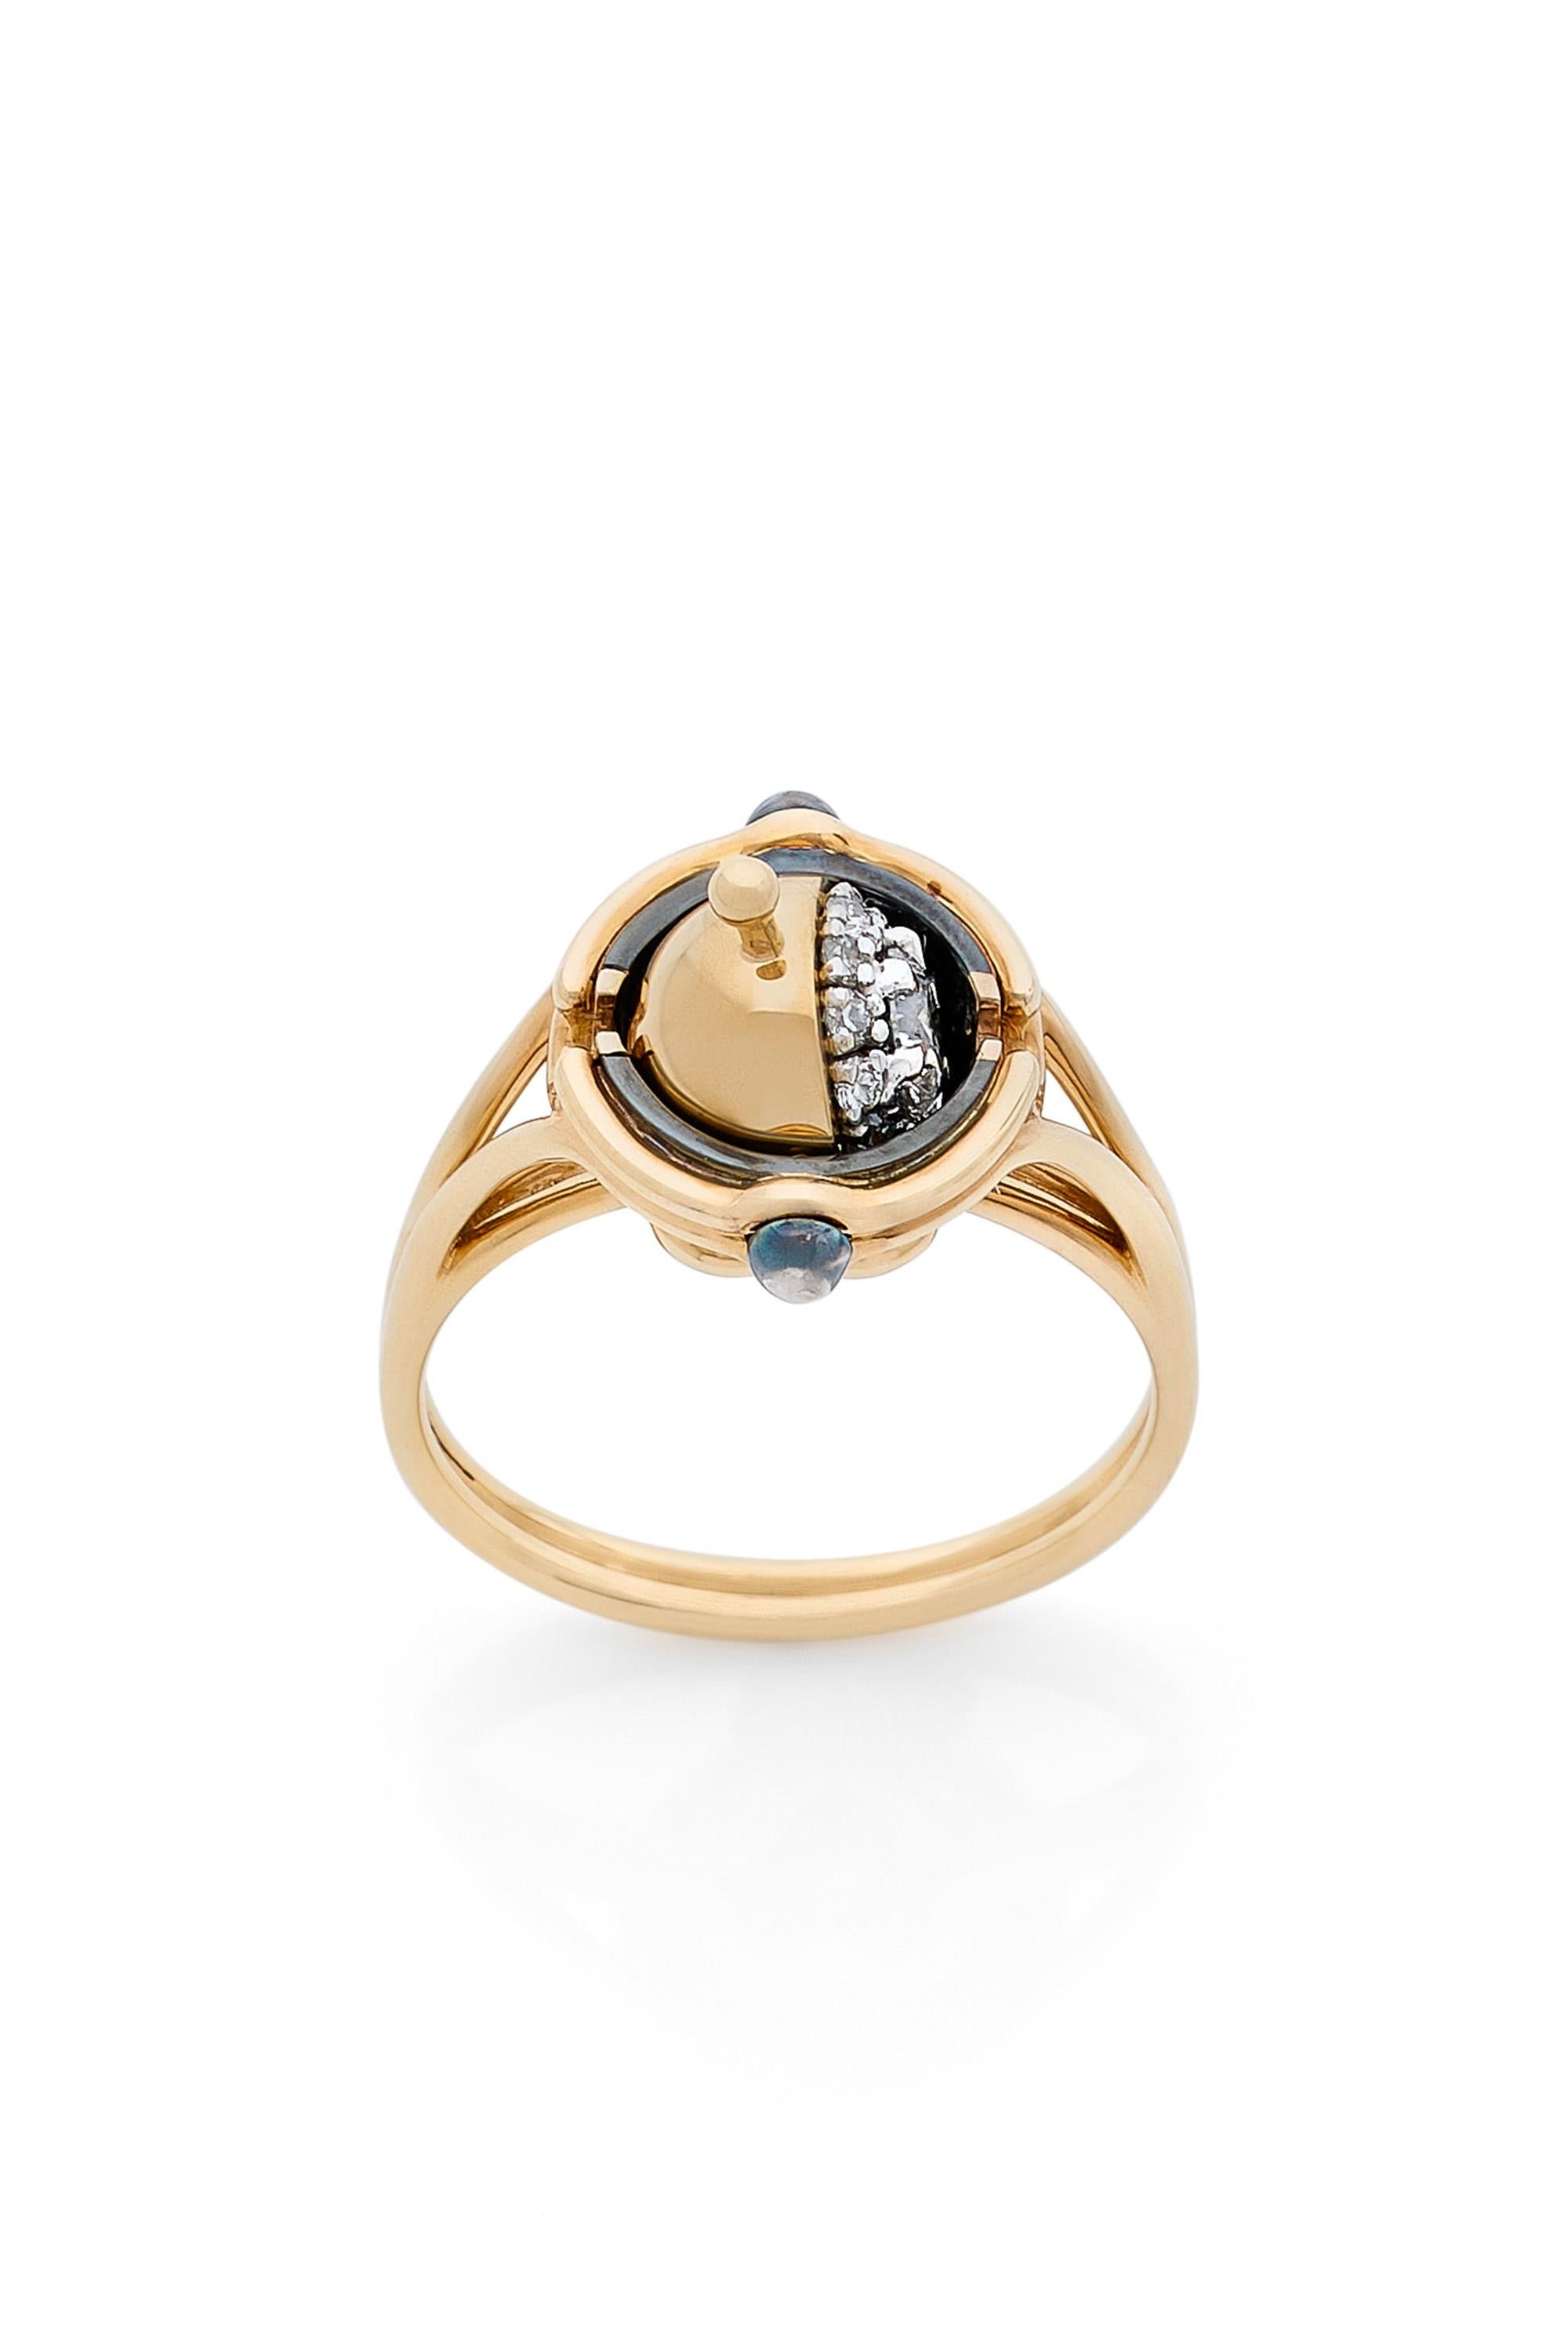 Gold and distressed silver ring. Rotating sphere revealing a diamond surrounded by diamonds.

Available in yellow and white gold.

Details:
Central Diamond: 0.23 cts, ø 4mm
12 Diamonds: 0.15 cts
18k Yellow Gold: 5 g
Distressed Silver: 1.5 g
Made in